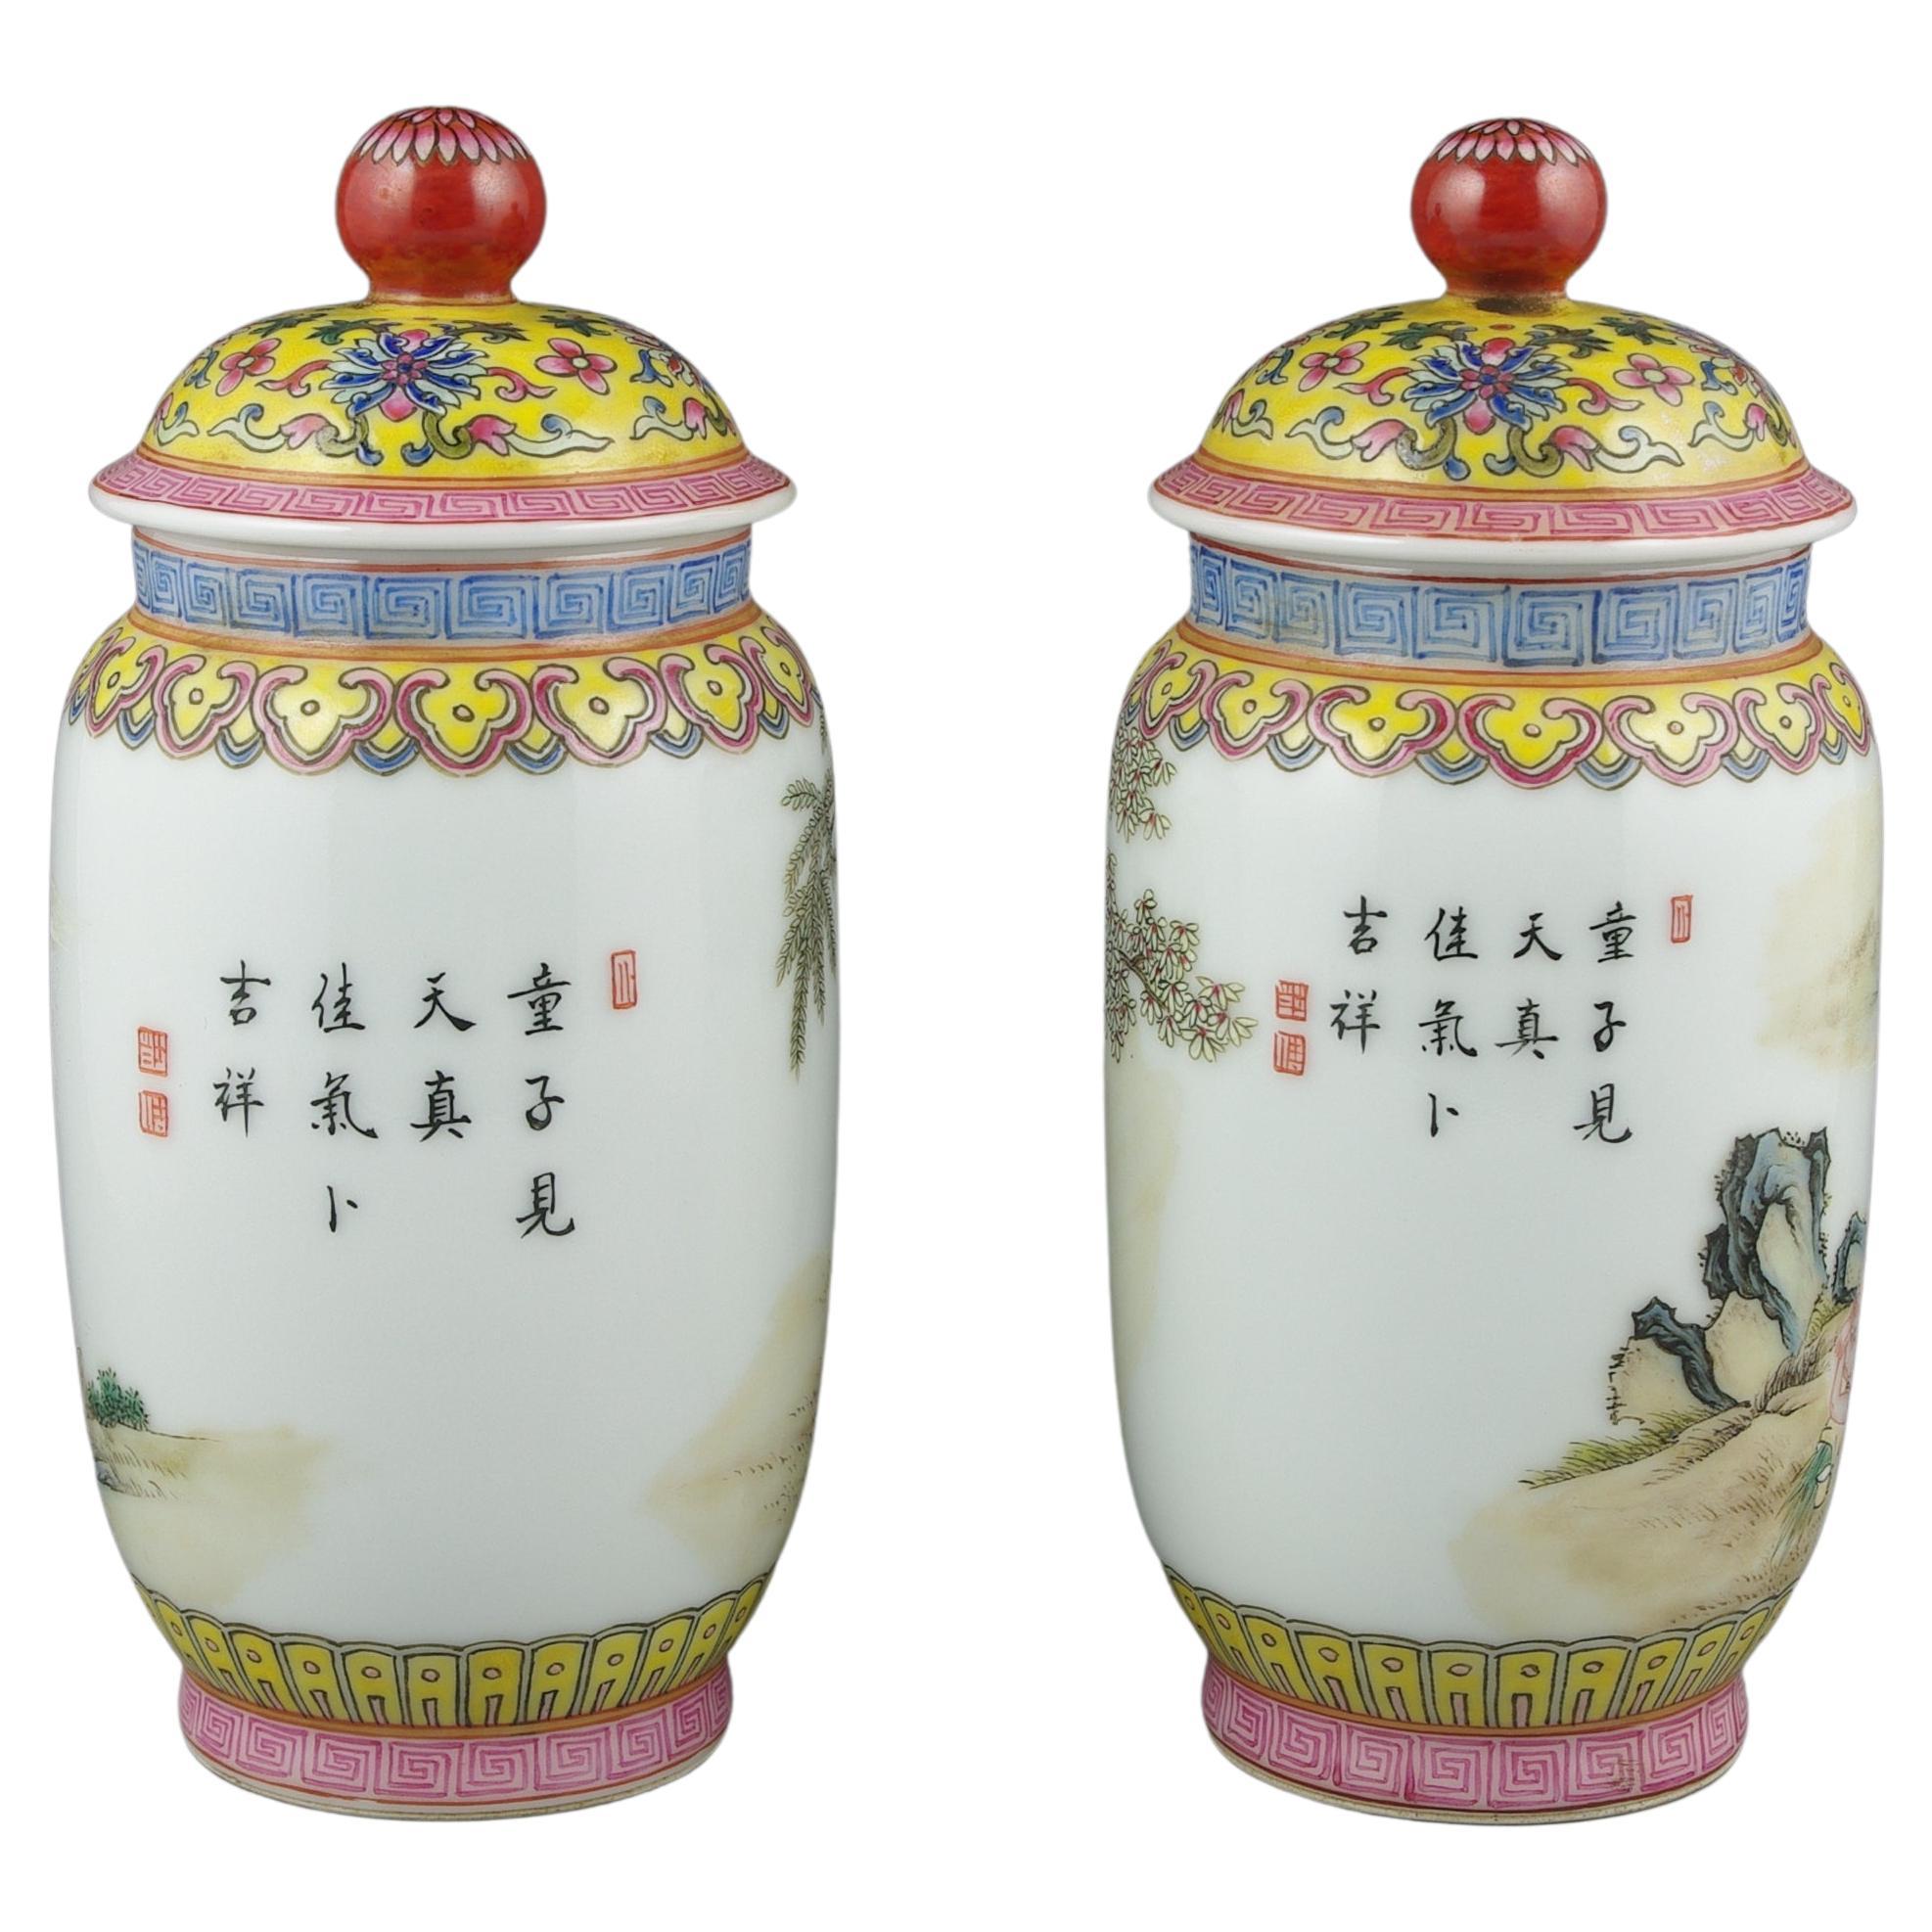 Finest Chinese Porcelain Fencai Covered Jars Children Playing Qing Style 20c  In Good Condition For Sale In Richmond, CA